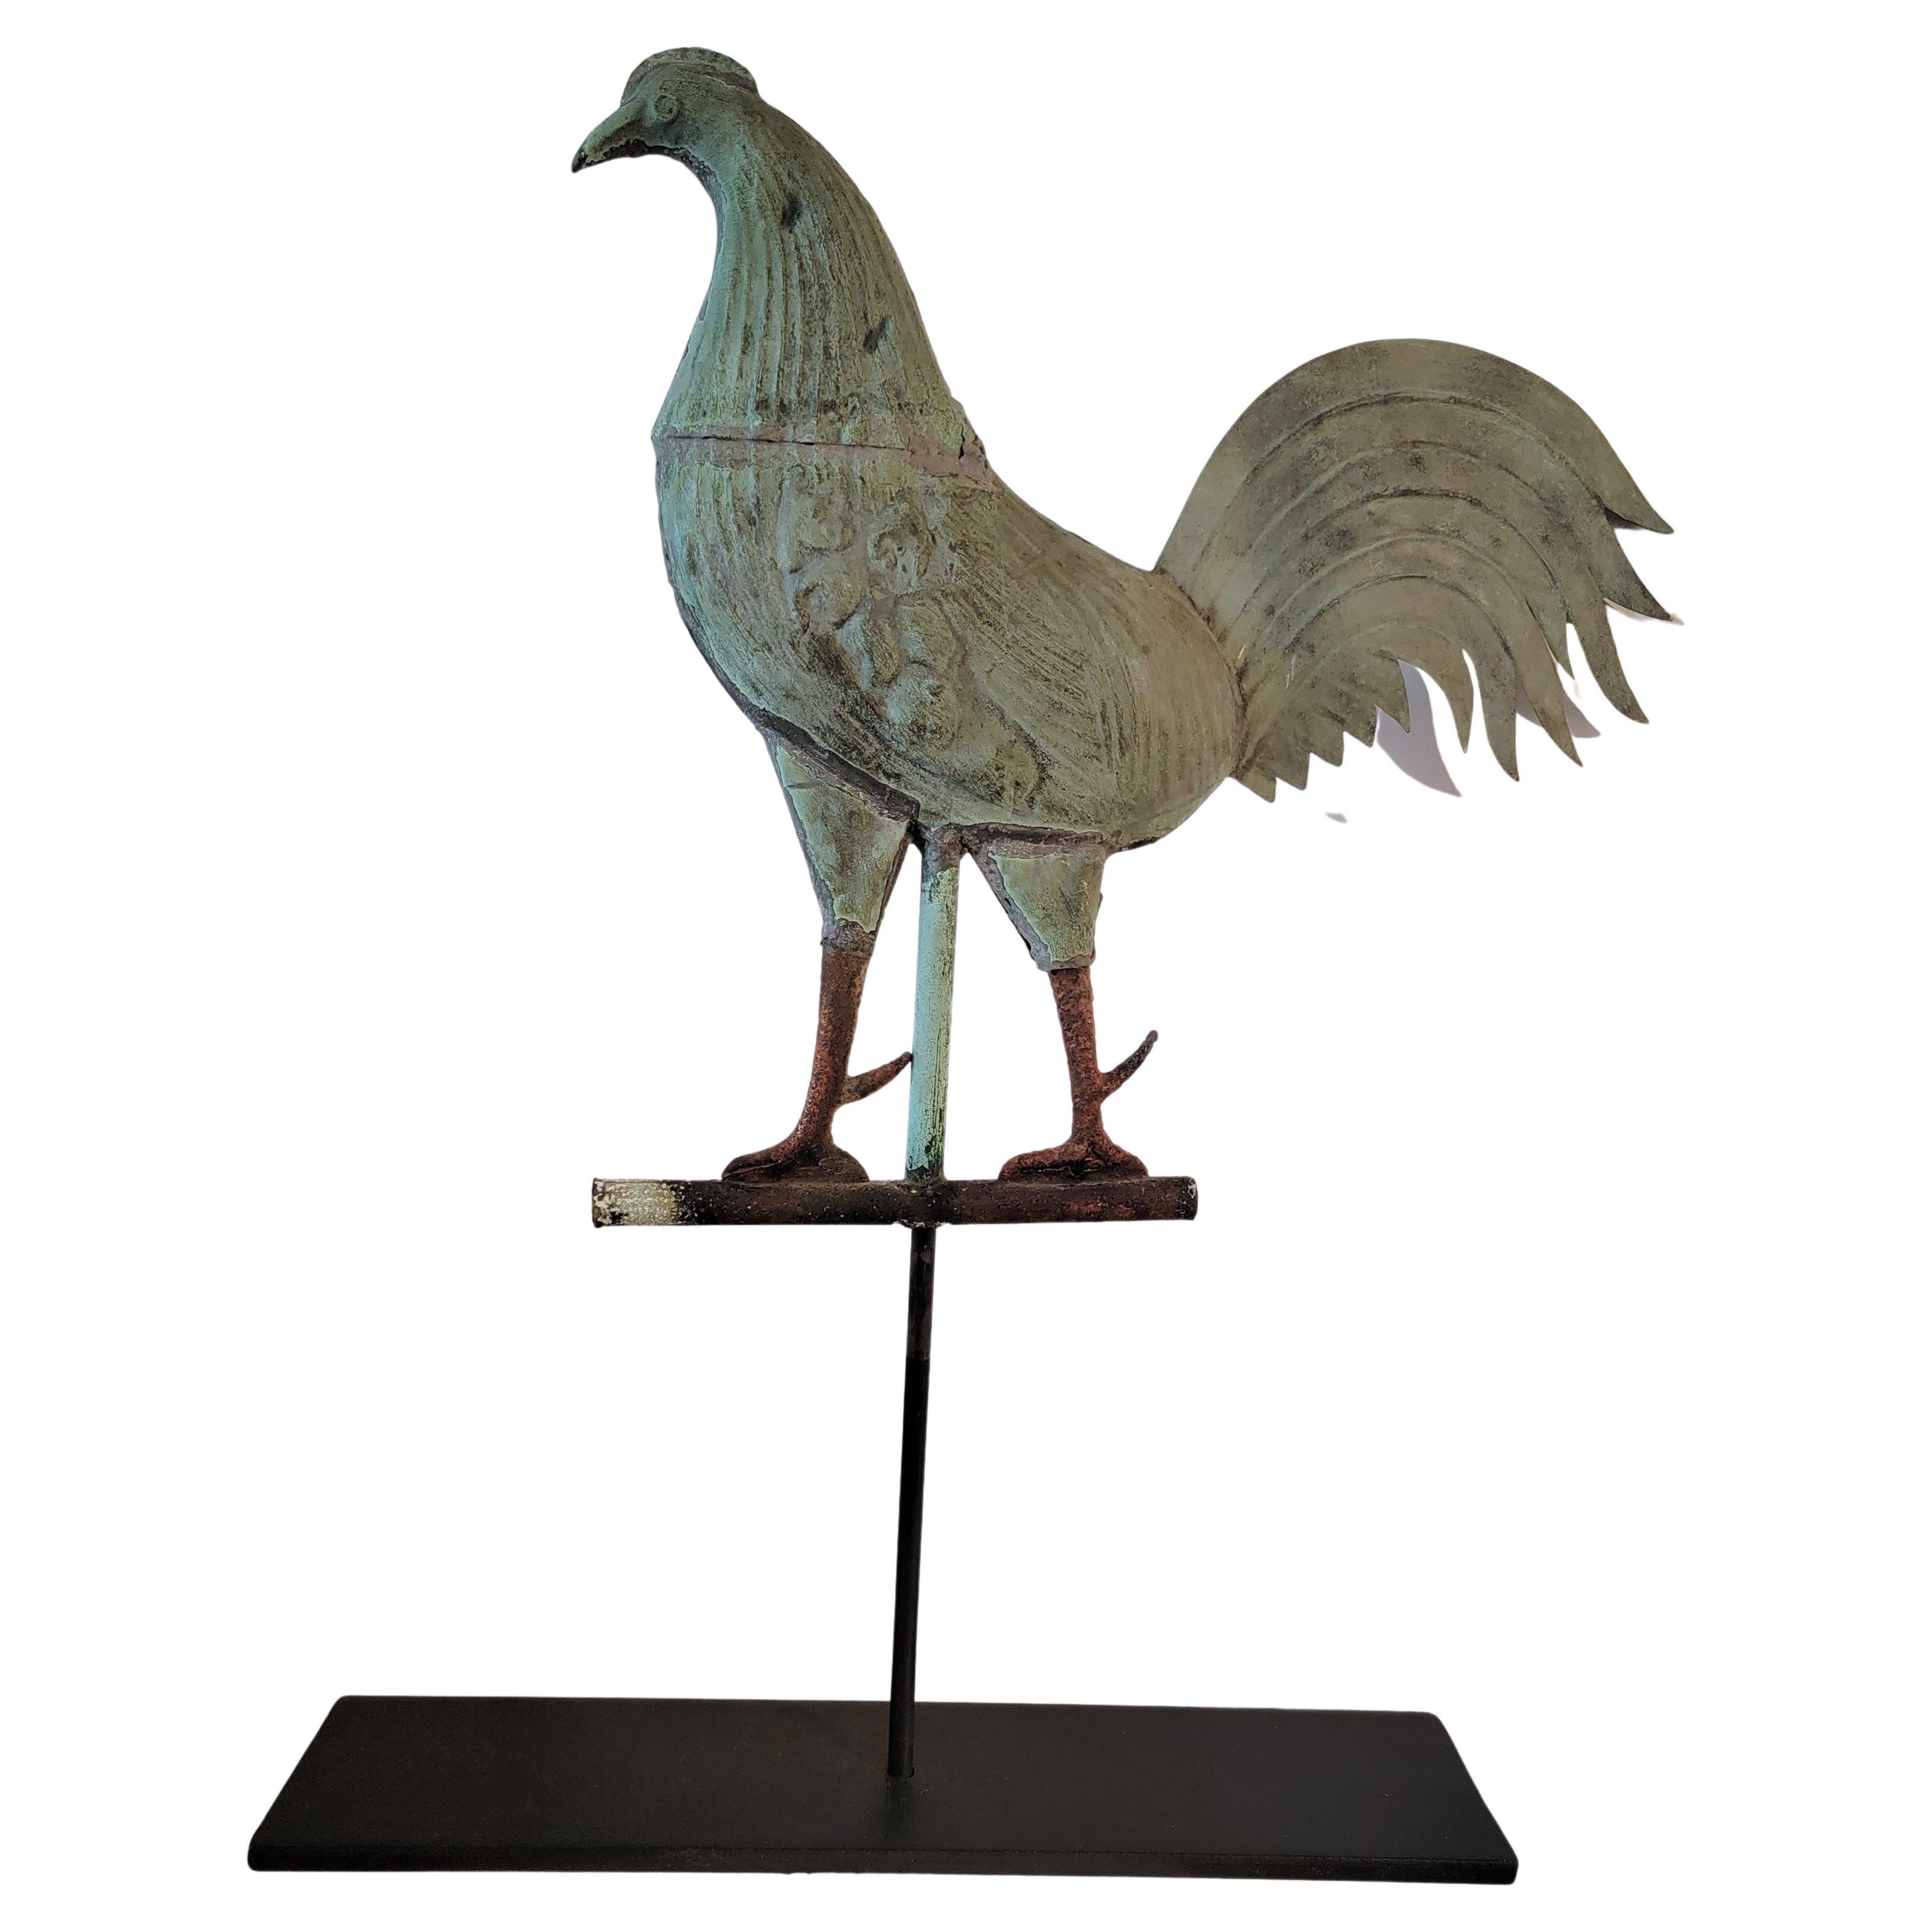 This fine early New England gamecock weather vane has an amazing undisturbed patina.On one side is a couple of bullet shot marks,but not all the way through.The feet & legs are a warn & patinaed forged iron. Such a great presents. This comes from a